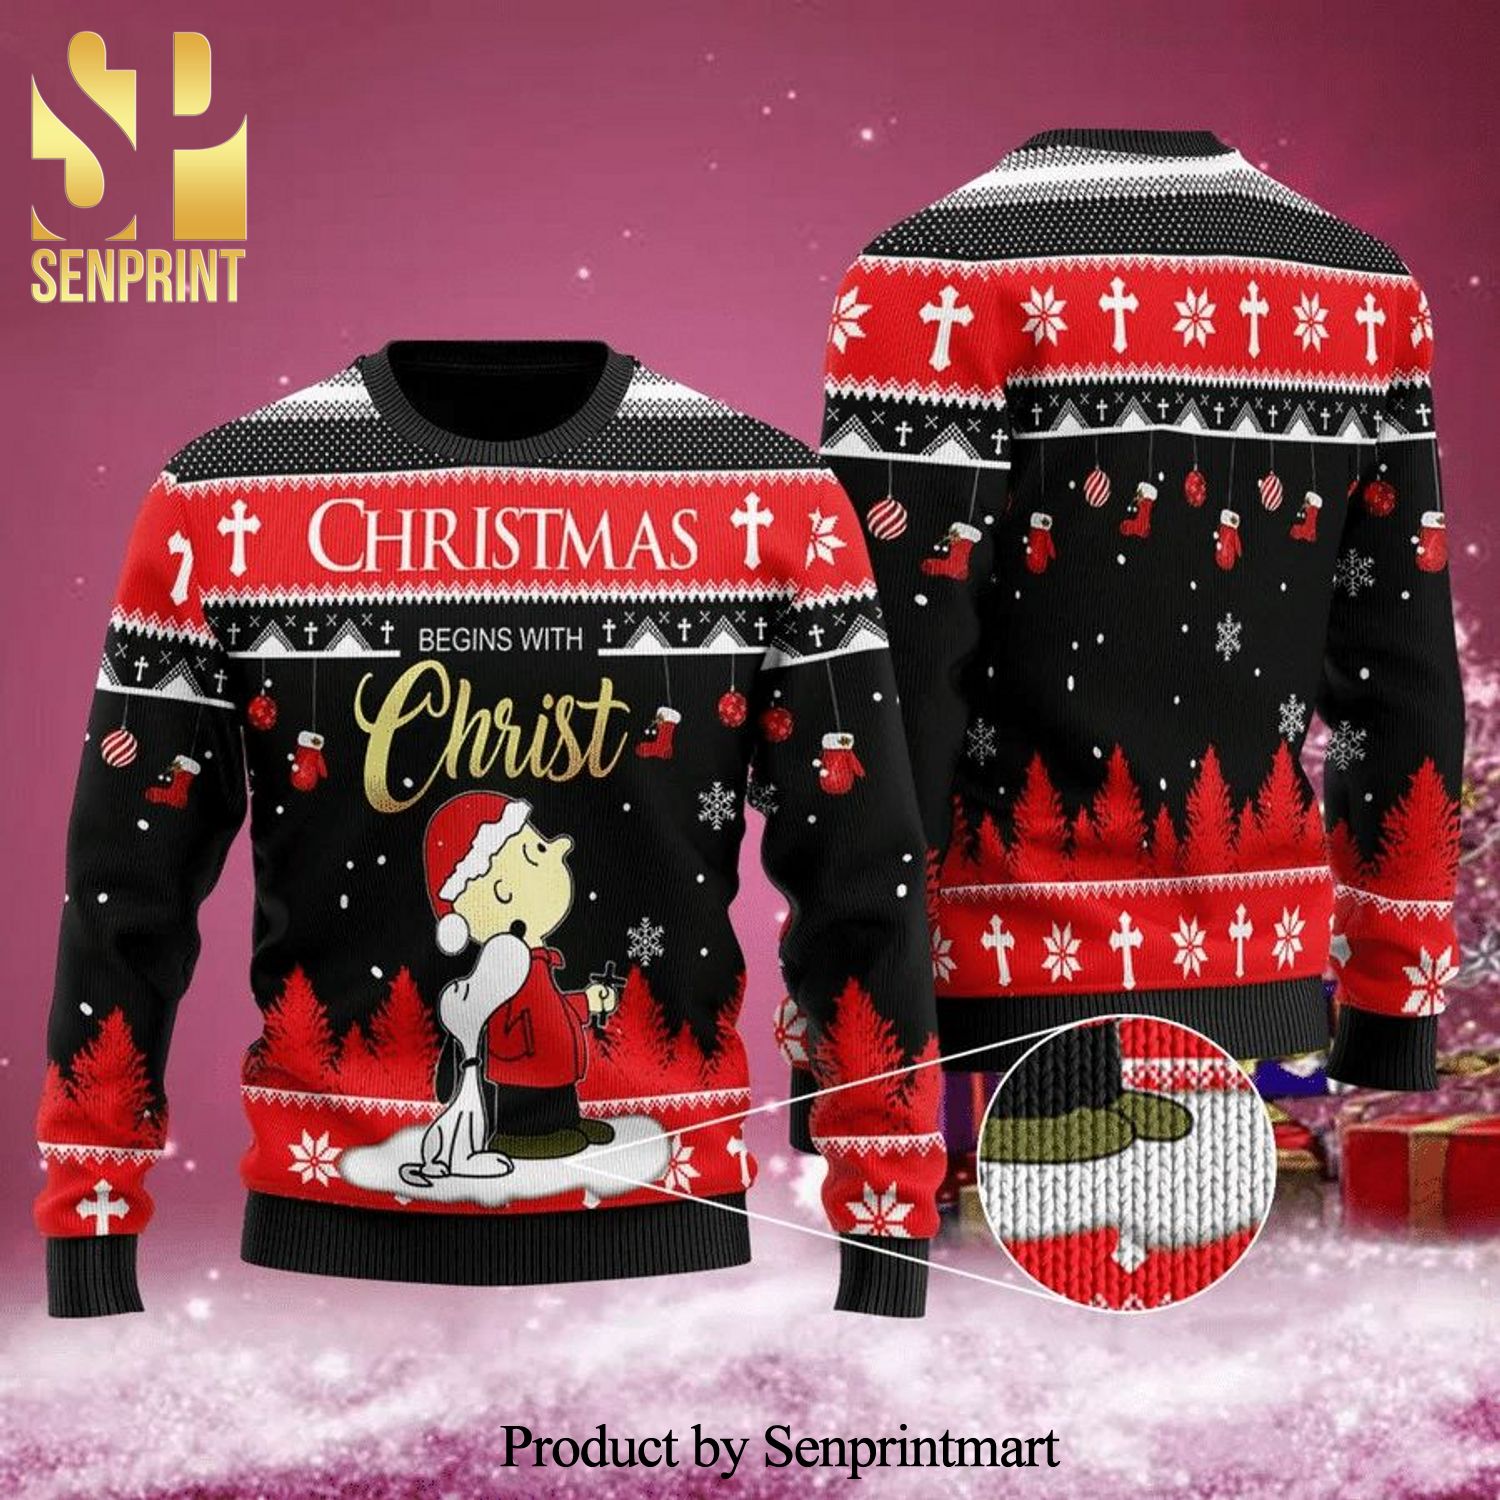 Christmas Begins With Christ Charlie Brown Snoopy Knitted Ugly Christmas Sweater